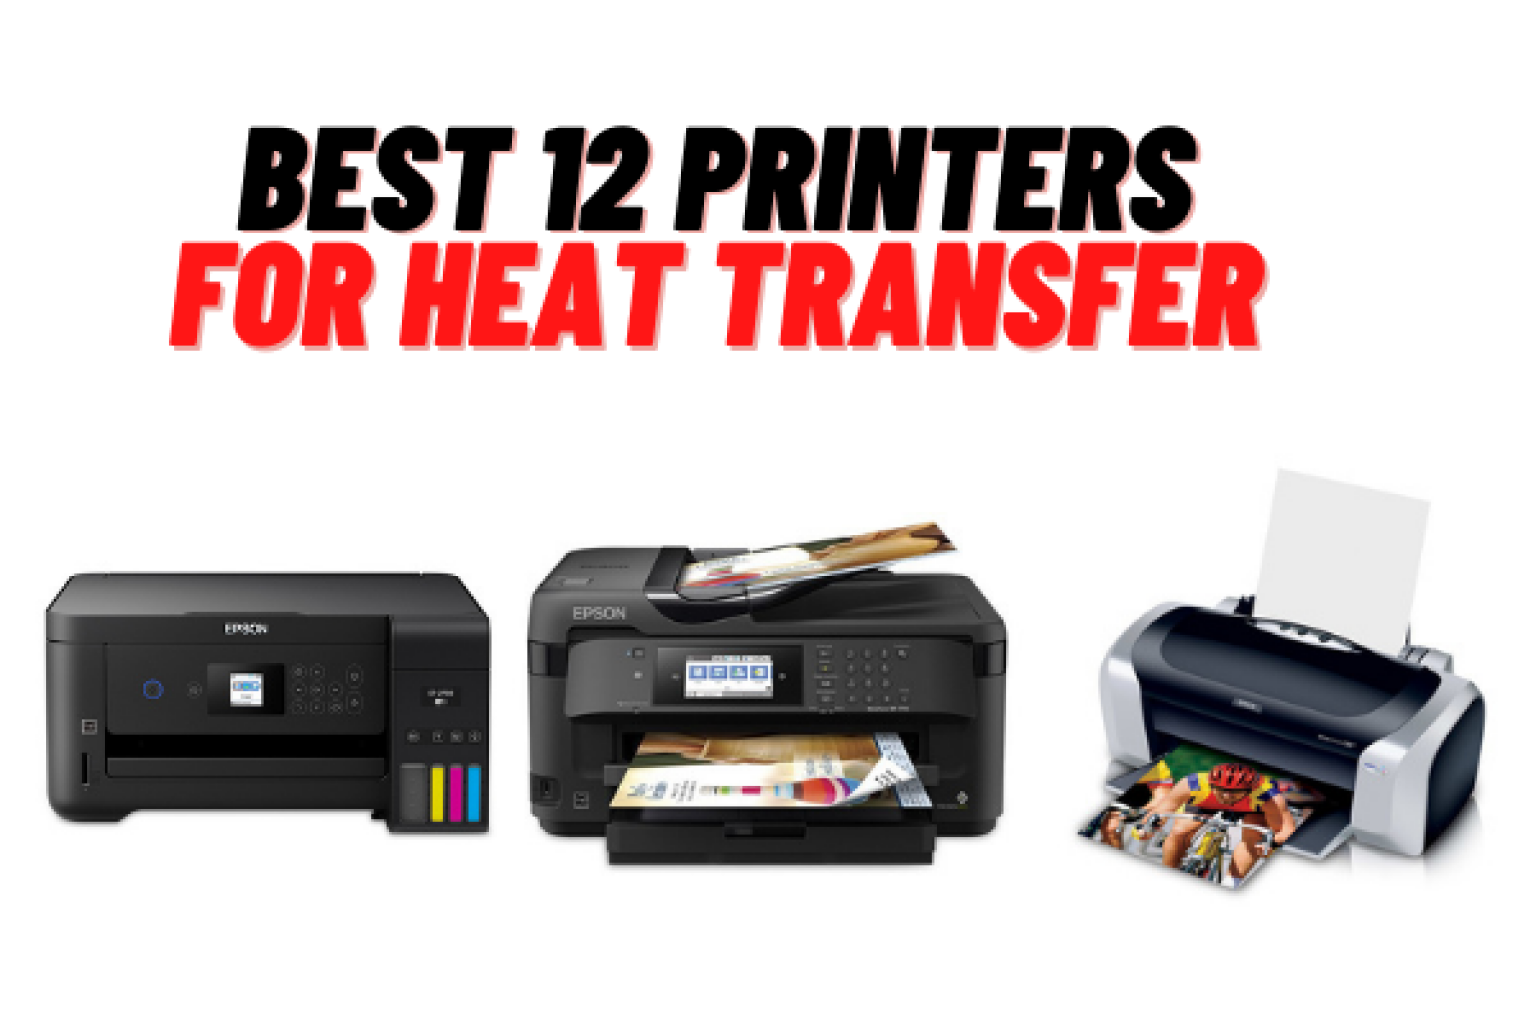 Best 12 Printers For Heat Transfer Printing 2021 Buyer's Guide